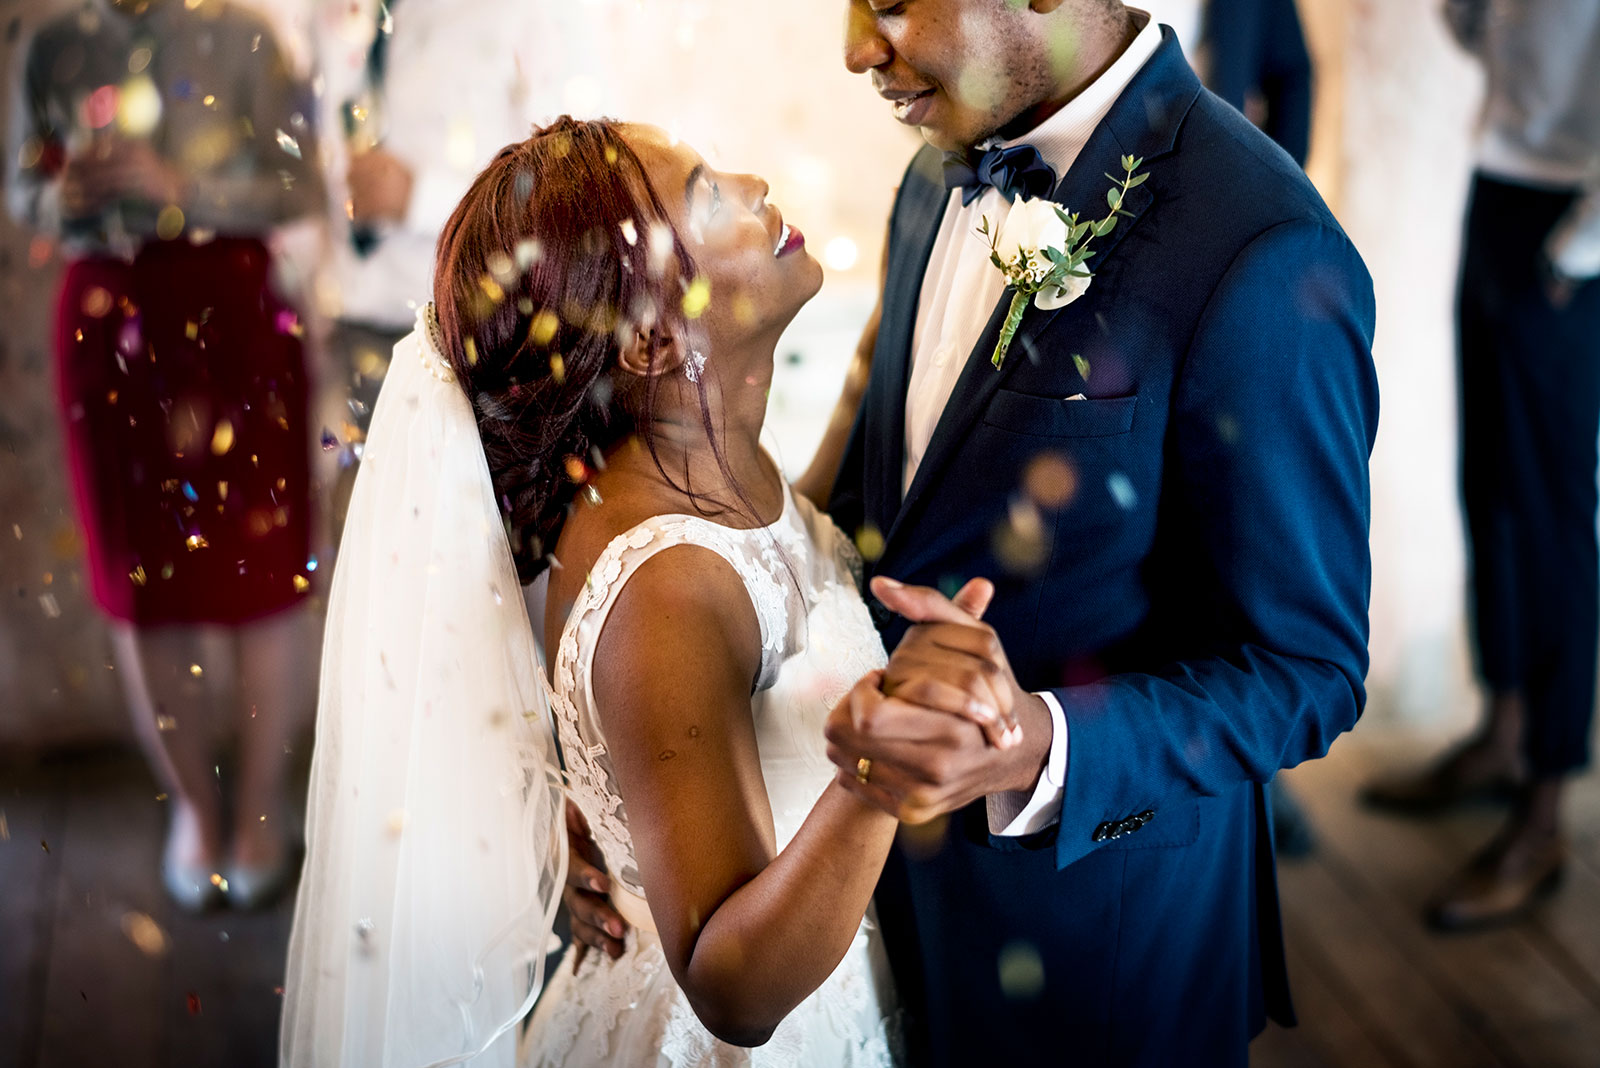 It’s Wedding Season in Memphis! How to Get a Picture-Perfect Smile for a Trip Down the Aisle